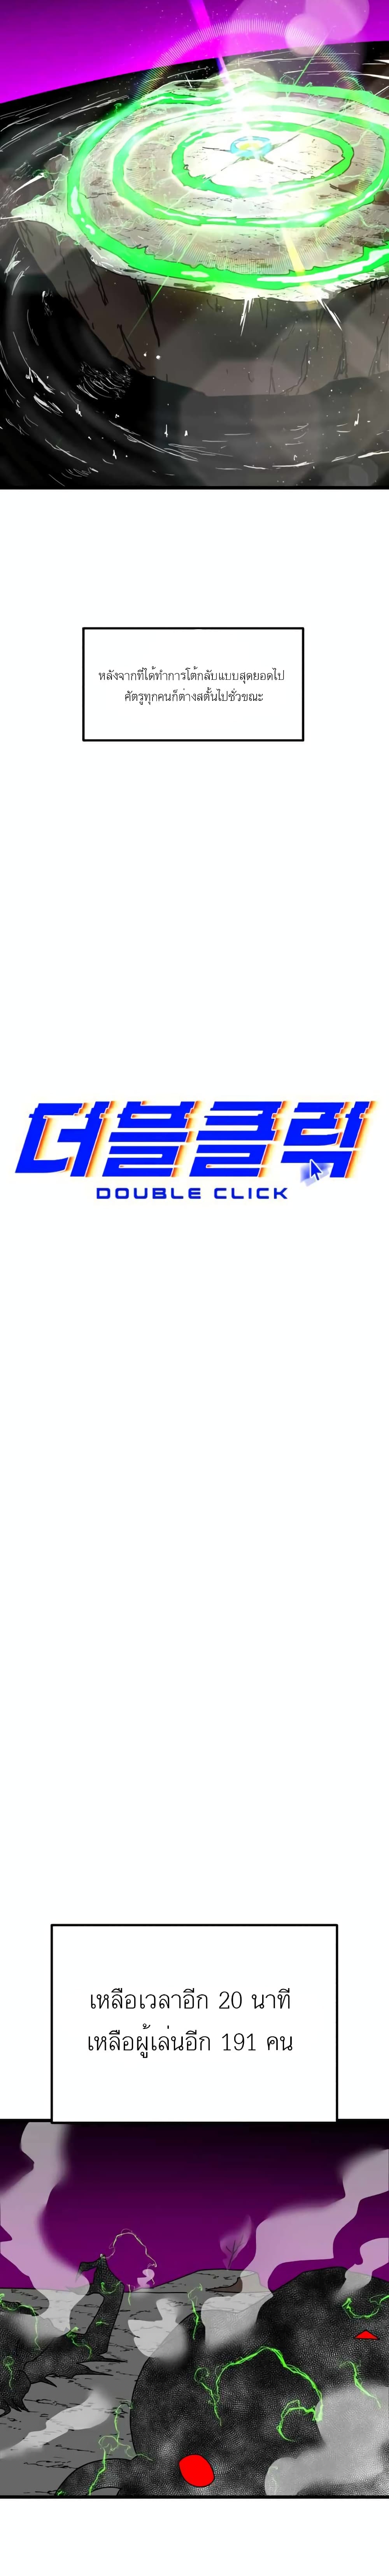 Double Click 36-36